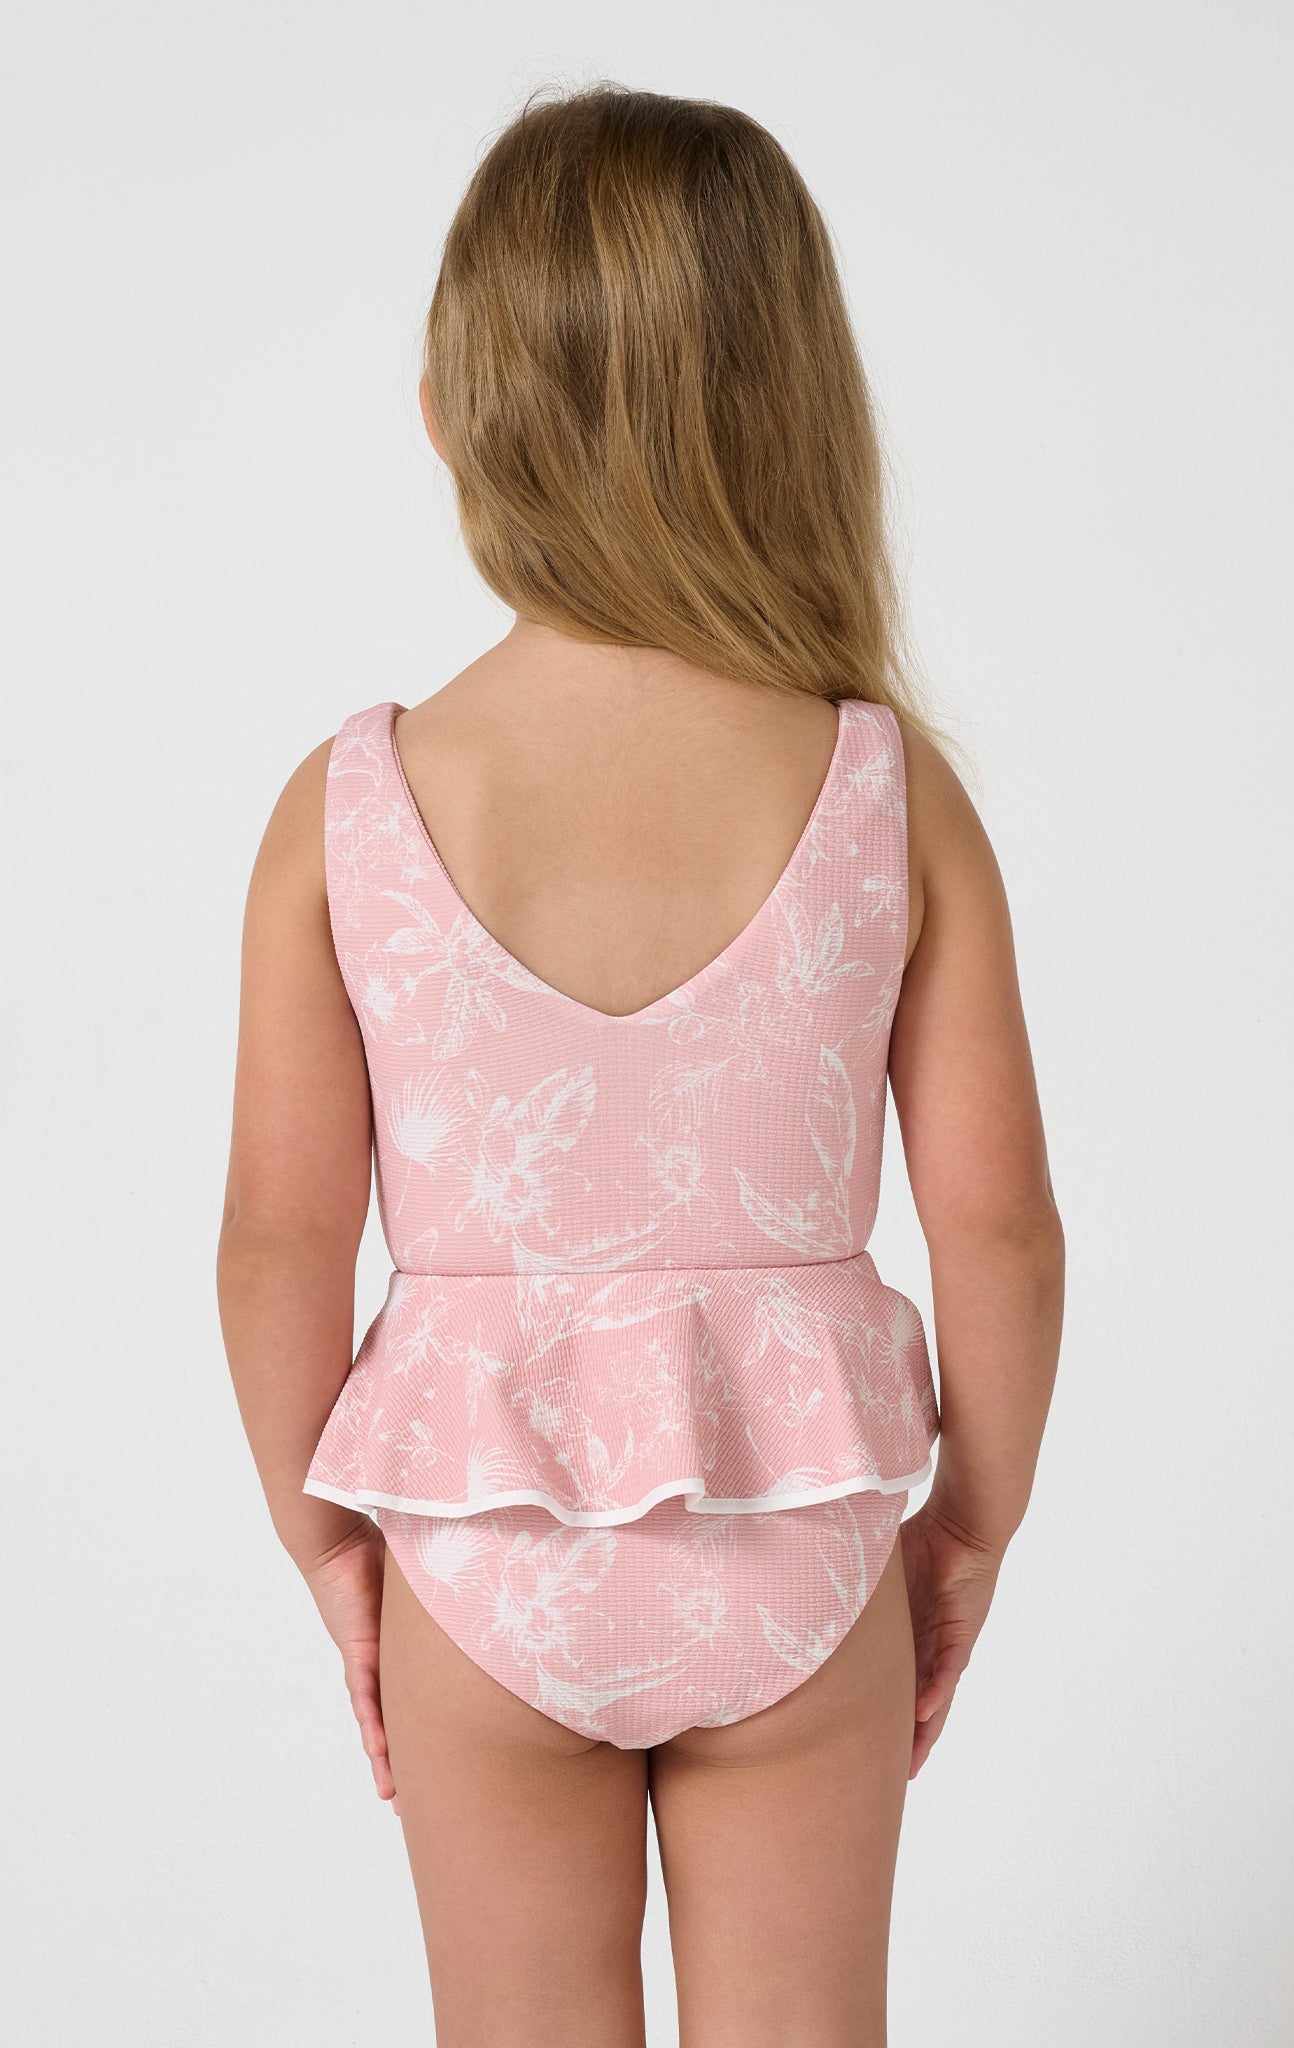 Bumby Piping Gramercy Maillot in Calm Floral Print MARYSIA